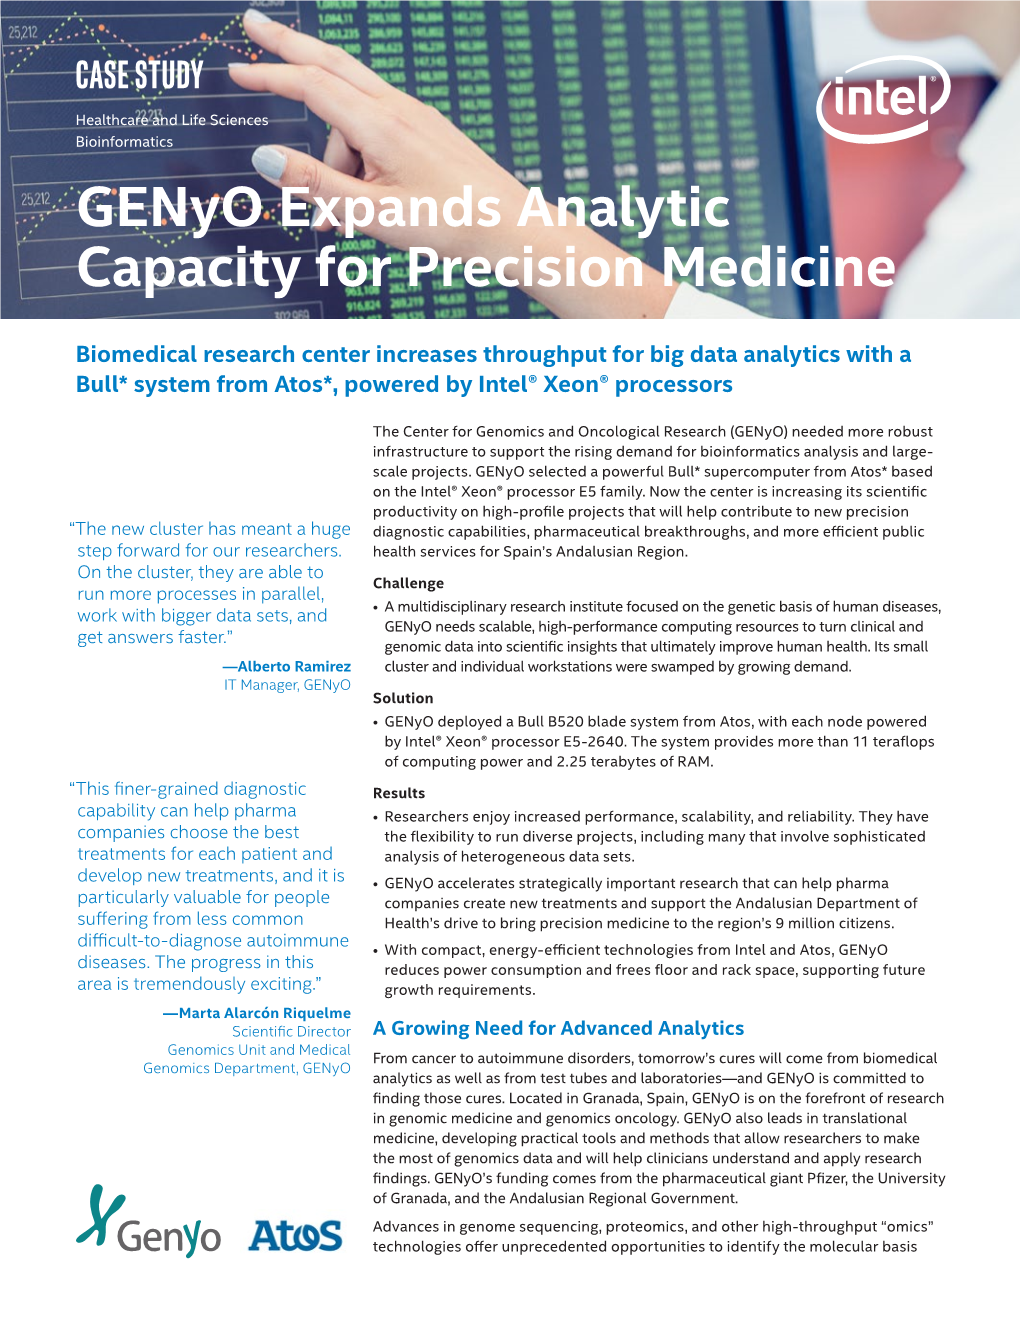 Genyo Drives Biomedical Analytics and Precision Medicine with Intel